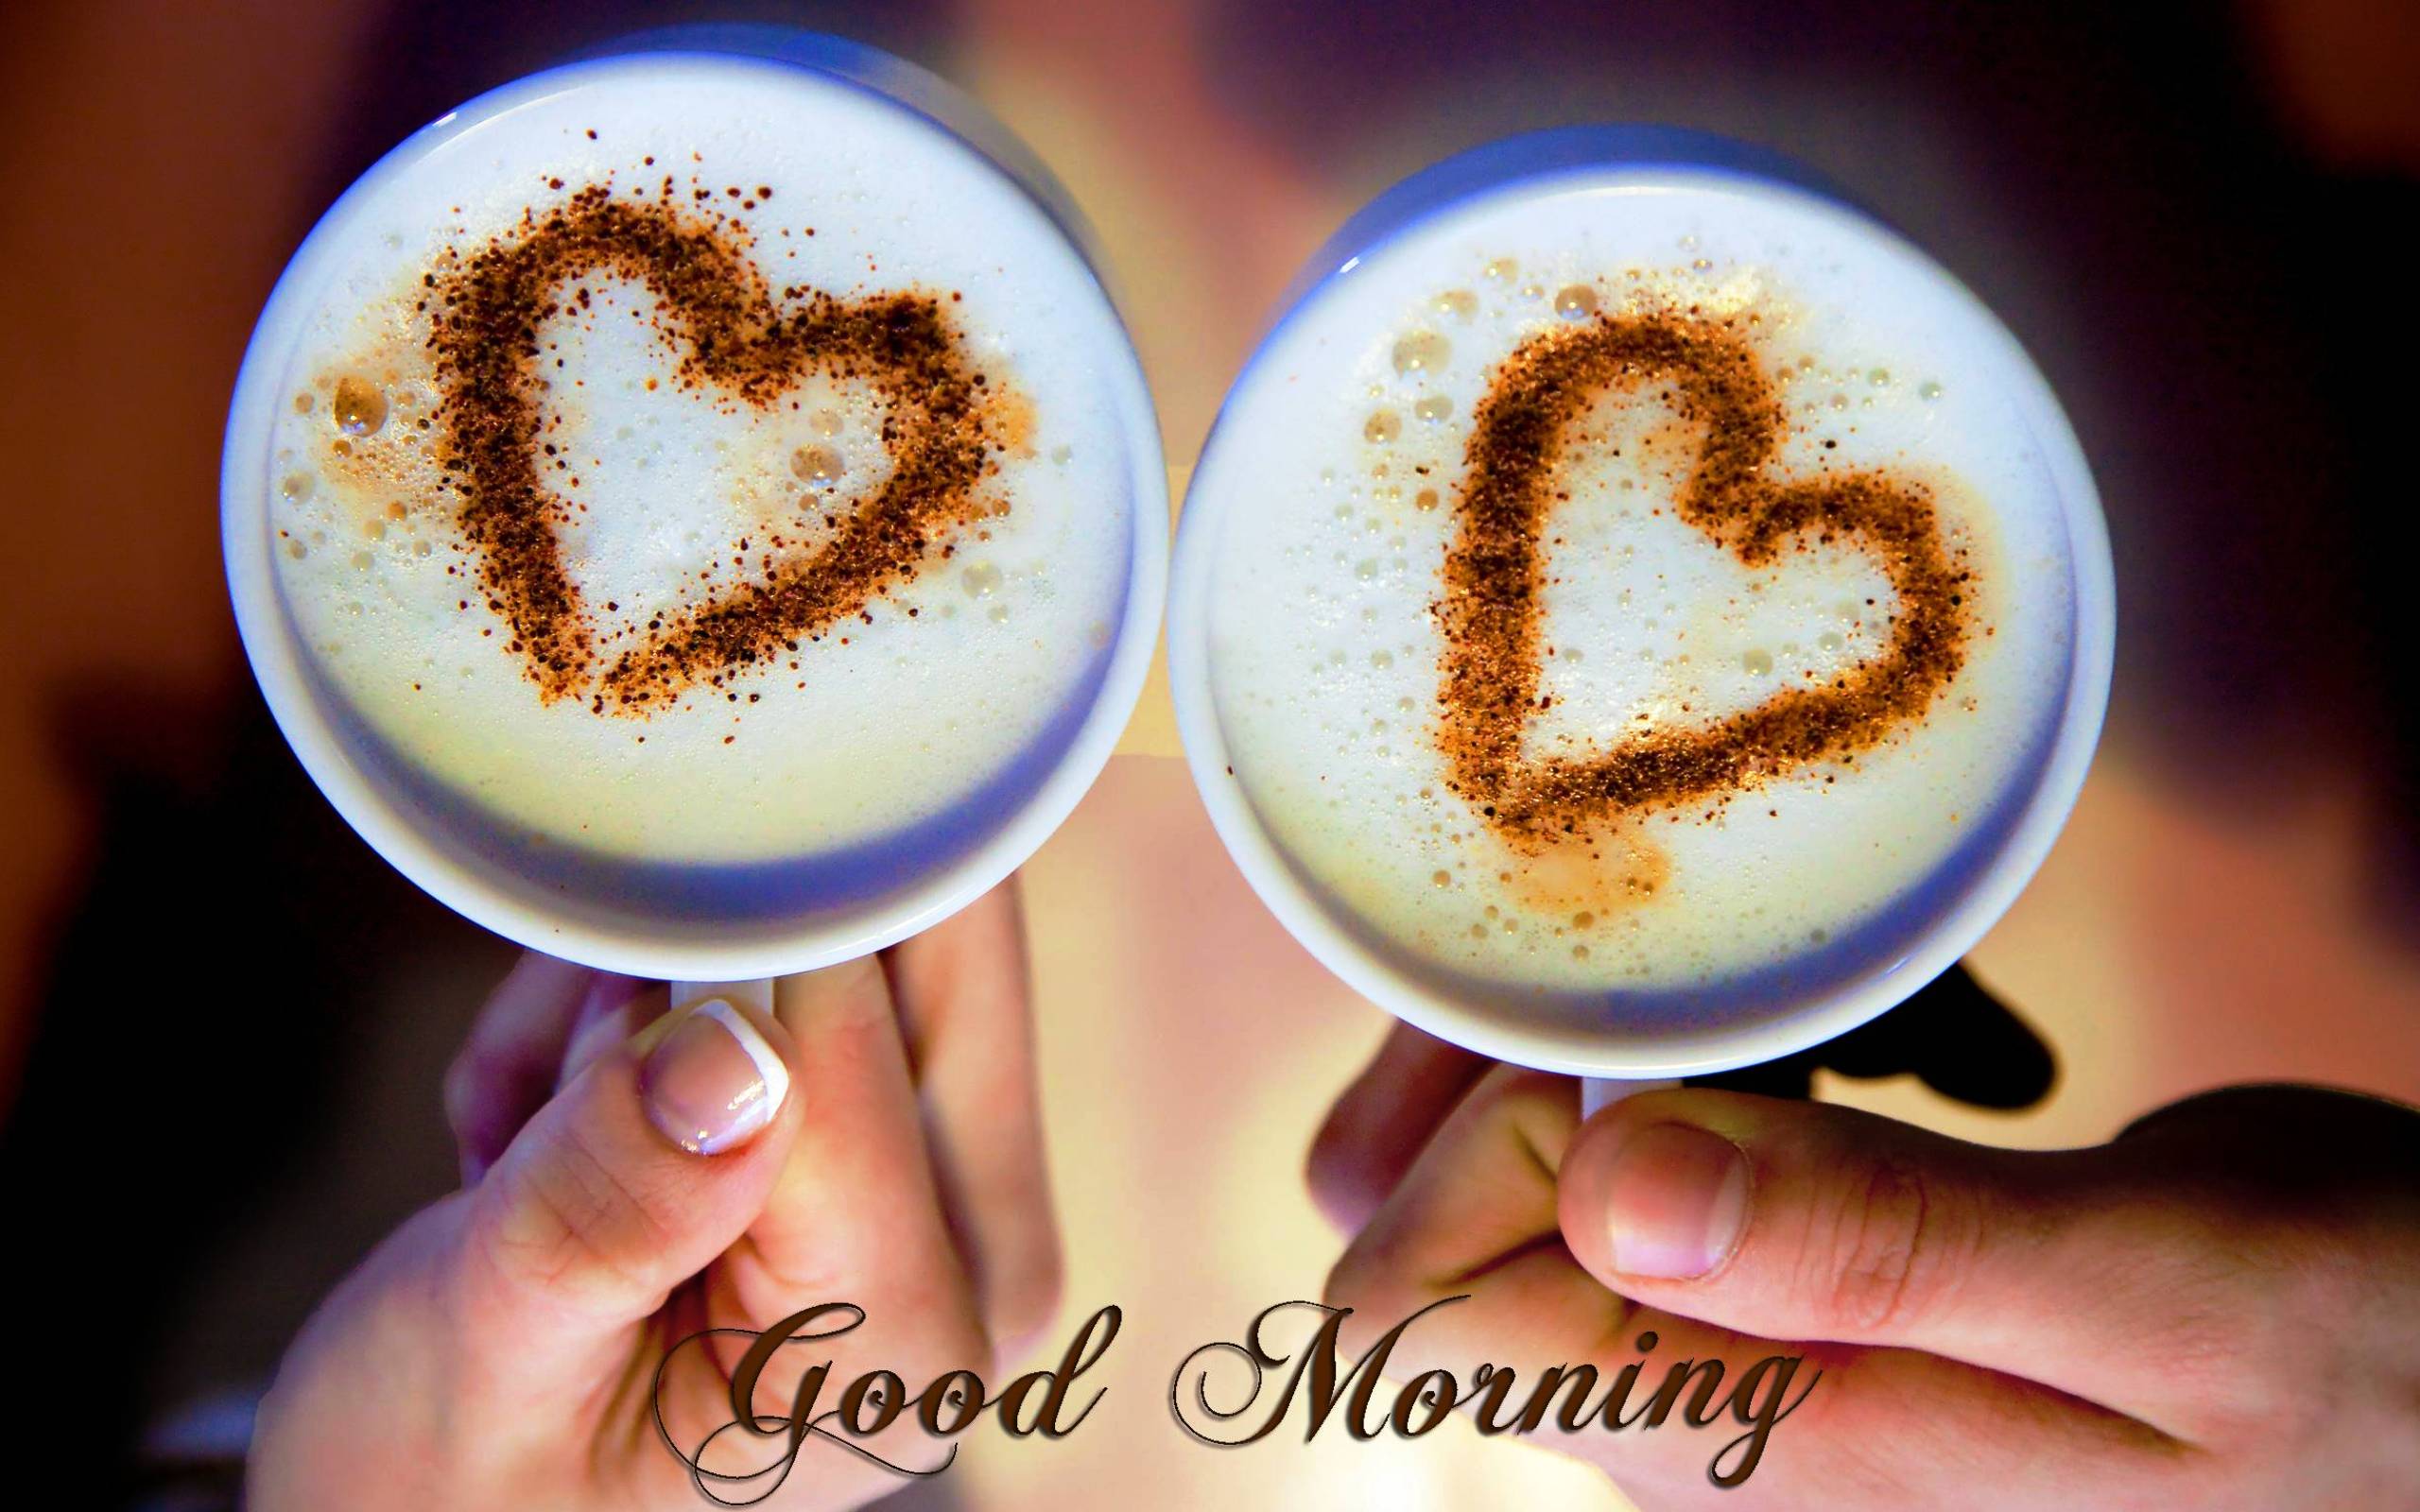 Romantic Love Cups Hearts Good Morning Love Hd Wallpapers 2560x1600 :  